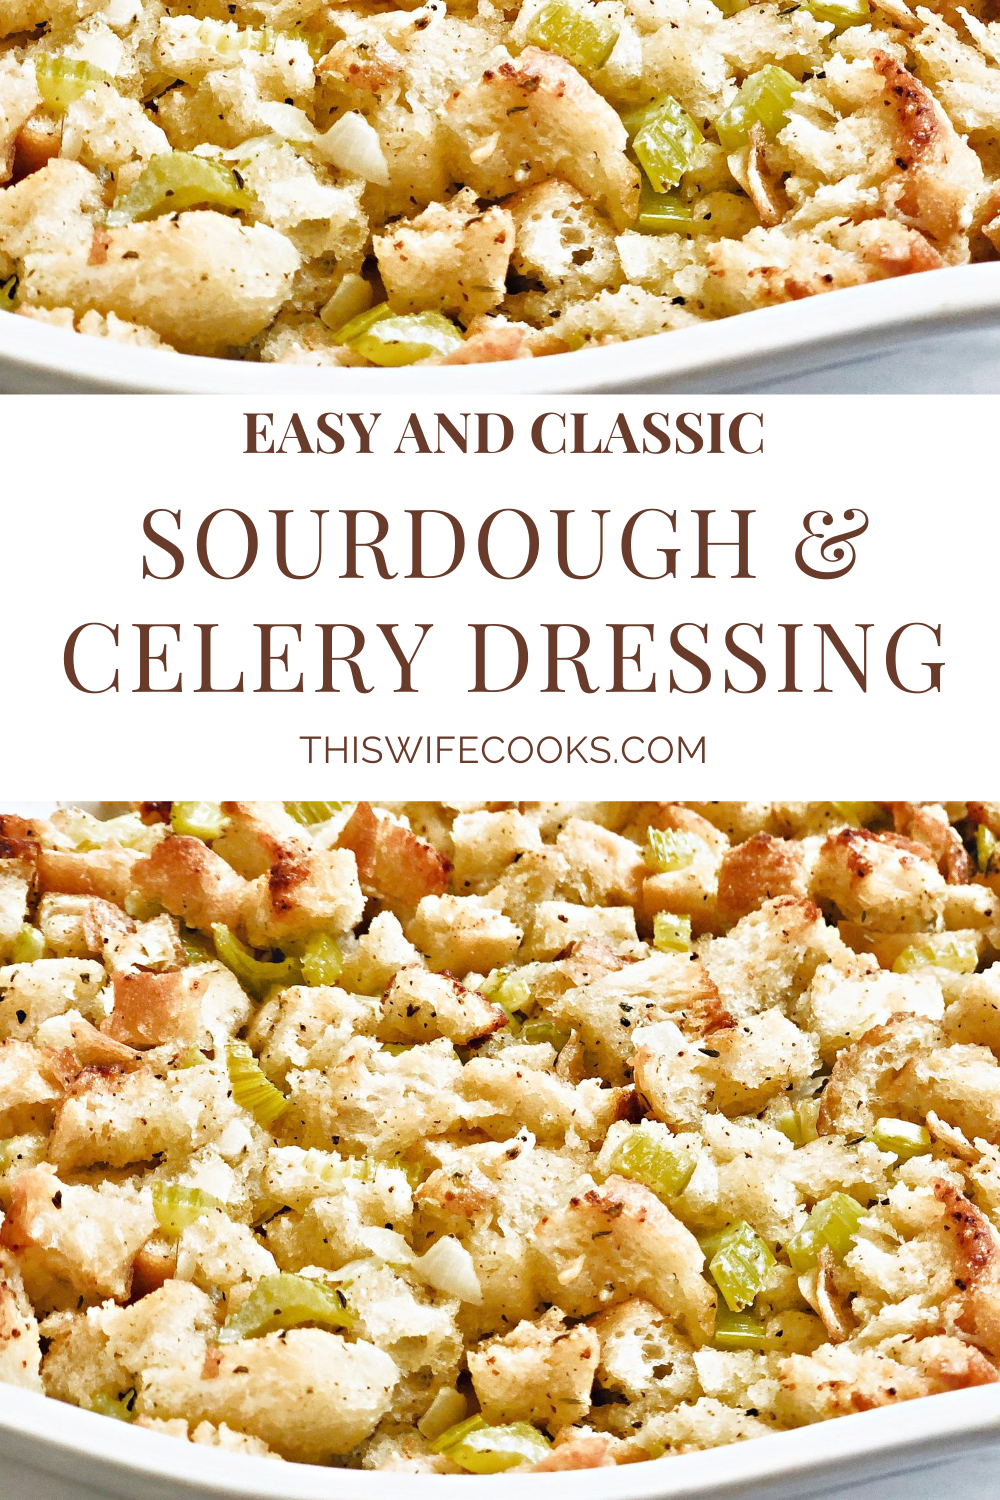 Sourdough and Celery Dressing - A hearty and savory baked casserole dressing that is easy to make and perfect for the holiday table! #sourdoughdressing #veganthanksgiving #plantbasedthanksgiving #celerydressing #veganeasterrecipes #veganthanksgivingrecipes #thiswifecooksrecipes #sourdoughandcelery via @thiswifecooks